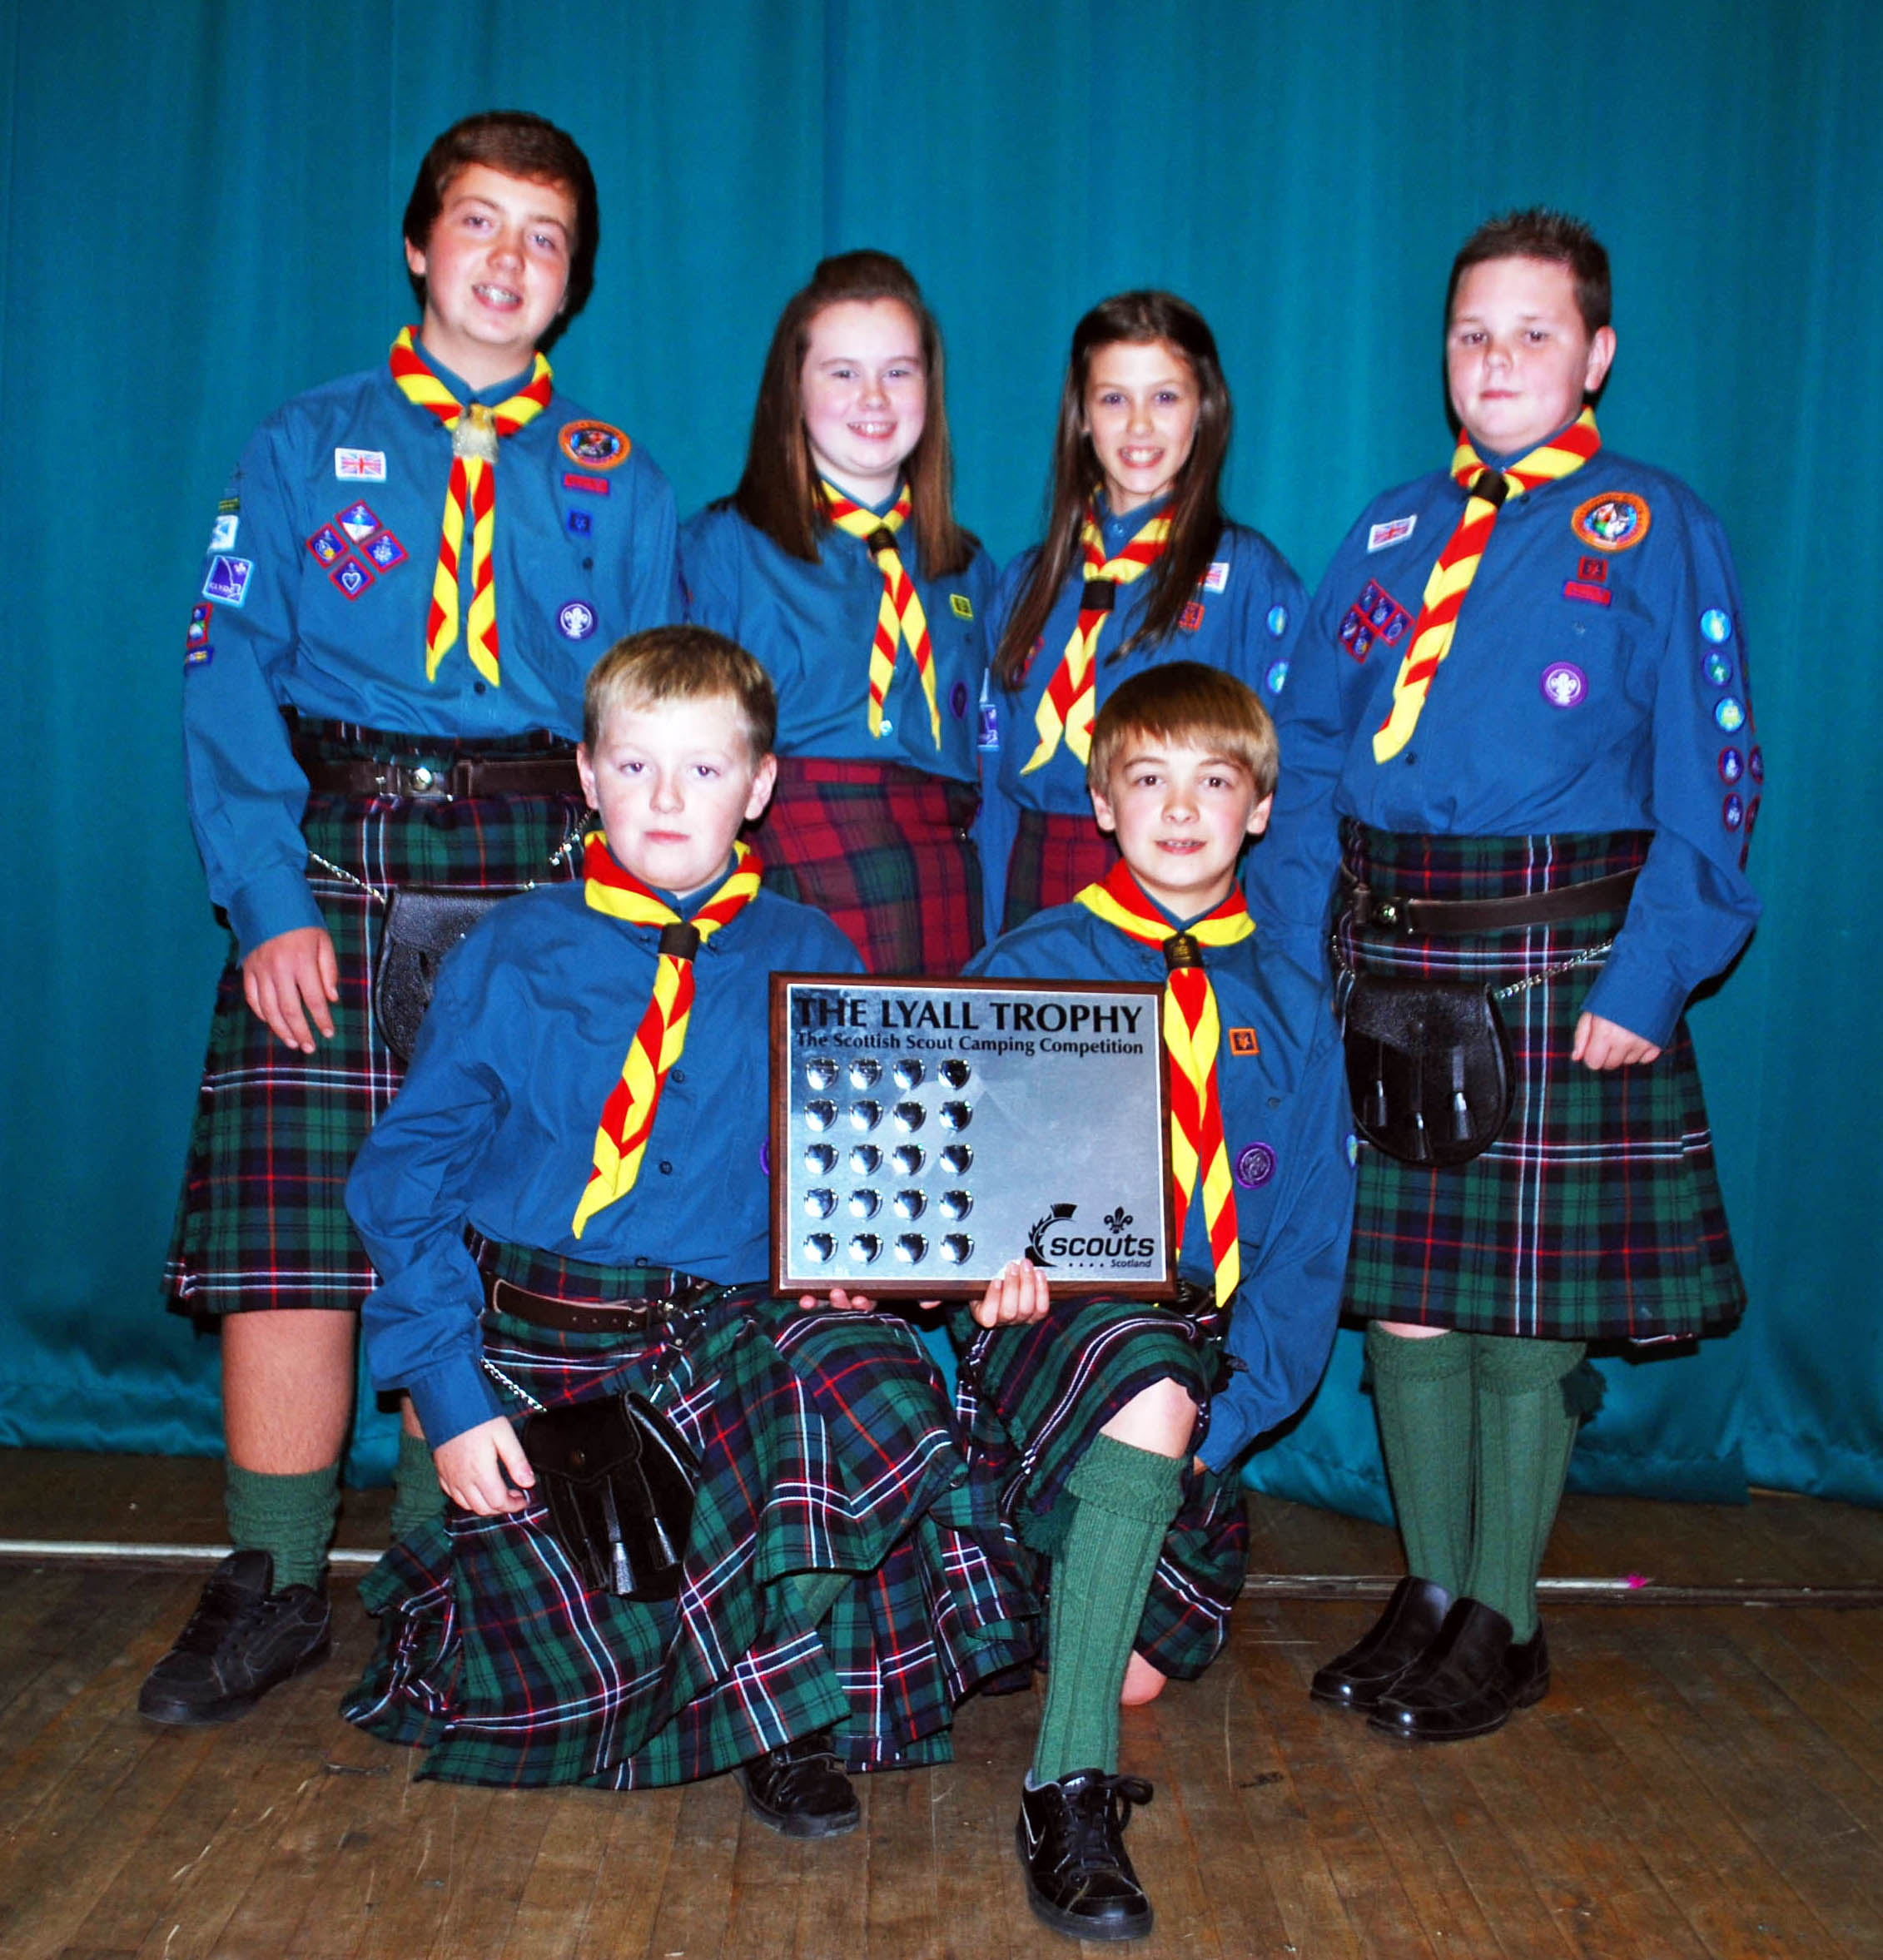 Winners of the 2011 Blacks of Greenock National Camping Competition